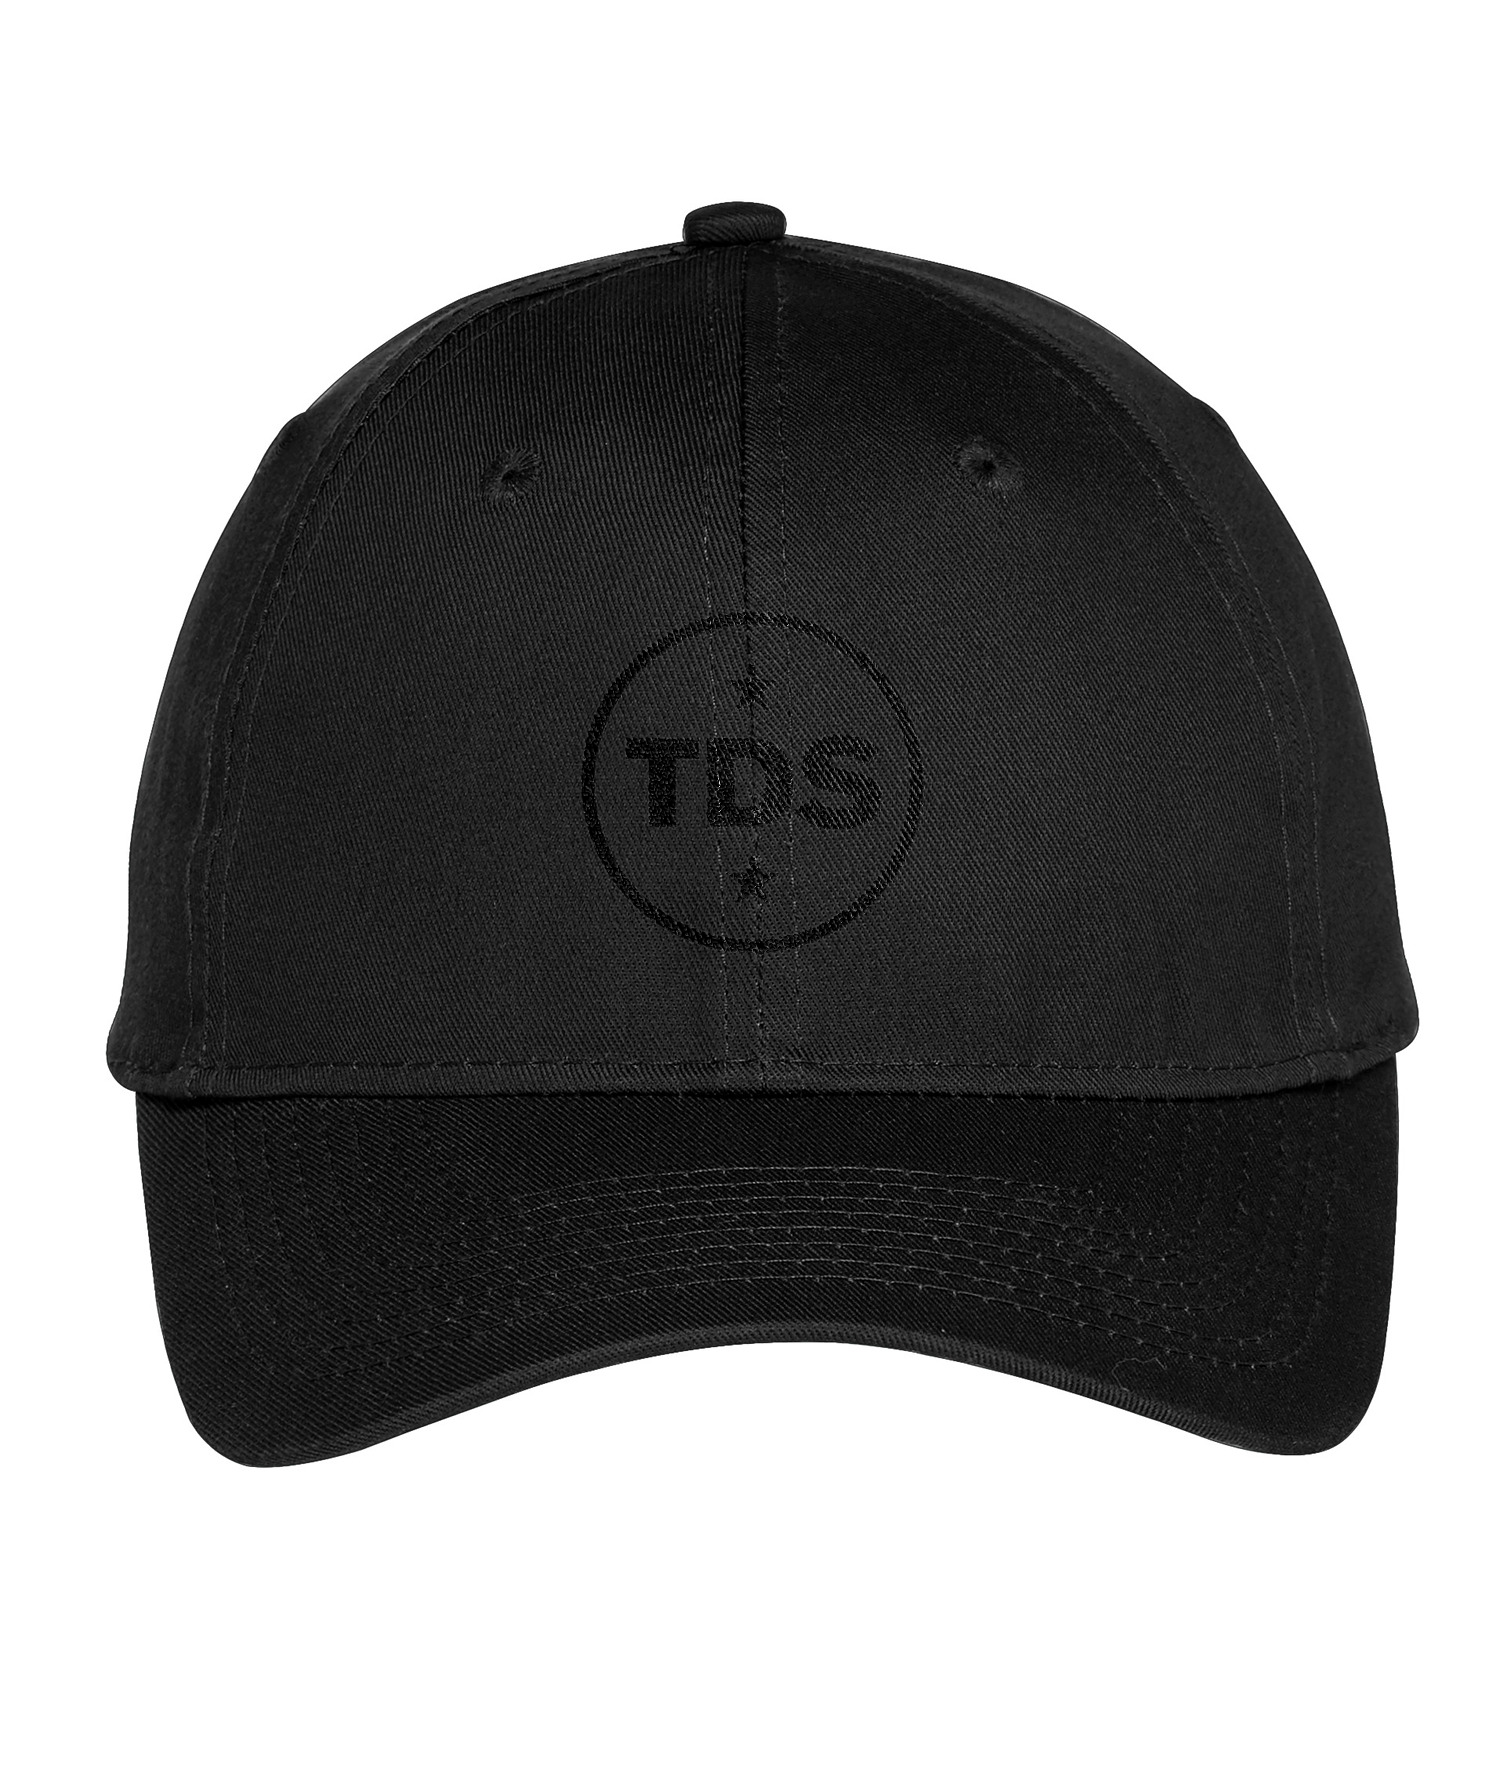 The Daily Show with Trevor Noah Monochrome Black Embroidered Hat